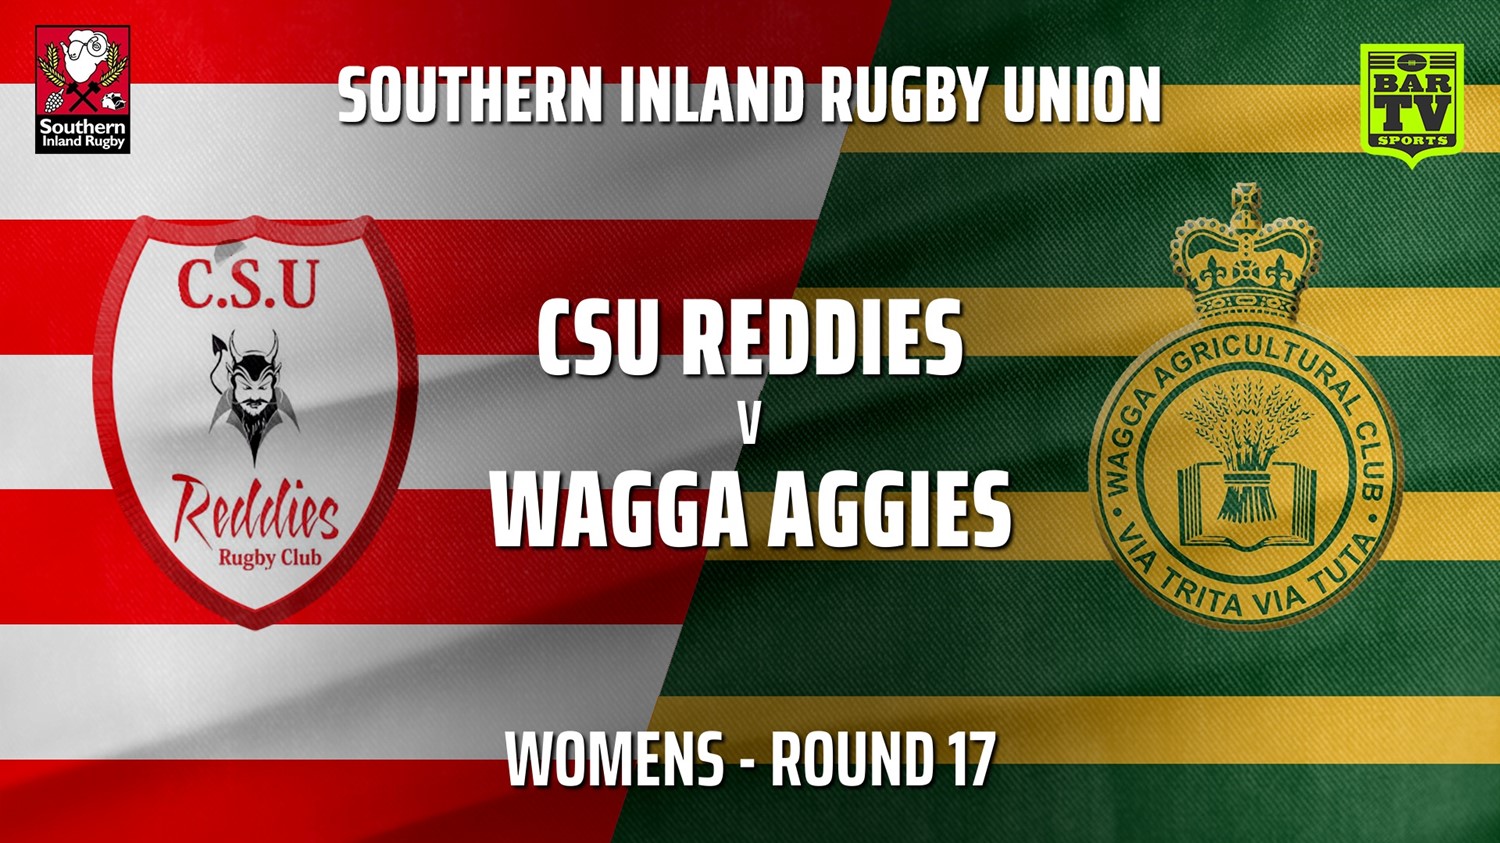 210807-Southern Inland Rugby Union Round 17 - Womens - CSU Reddies v Wagga Agricultural College Minigame Slate Image